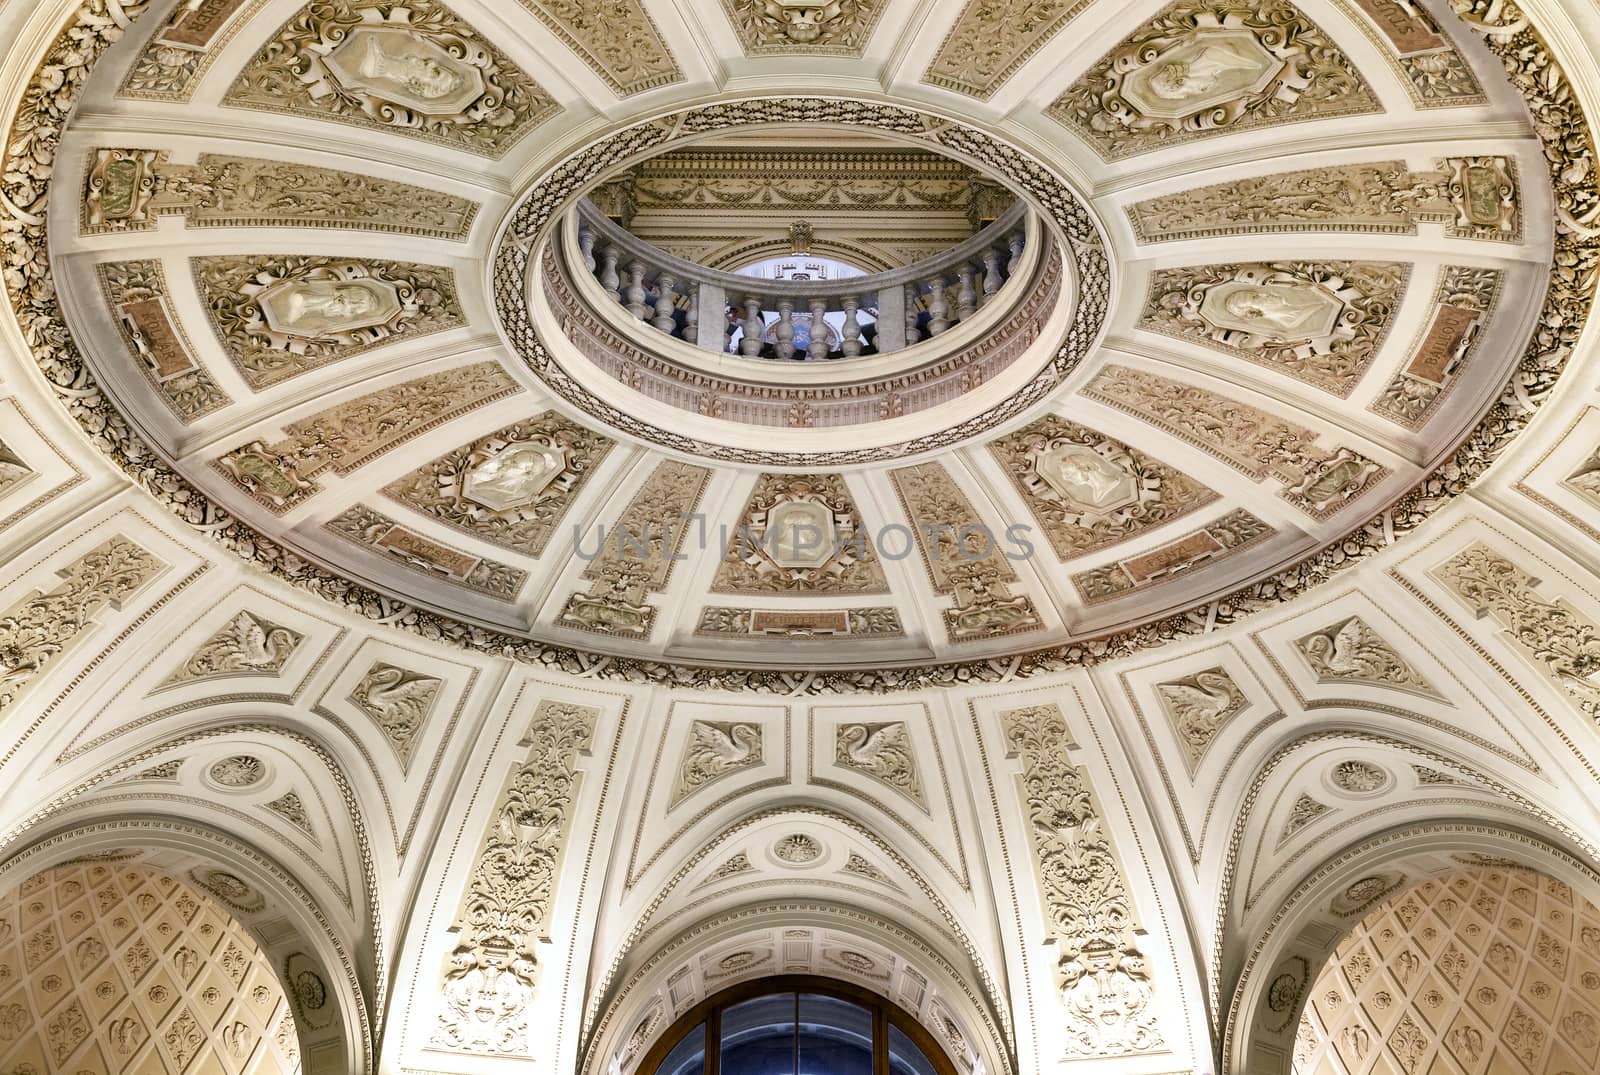 Vienna, AUSTRIA - FEBRUARY 17, 2015 - Ceiling of the Natural History Museum in Vienna. by Goodday